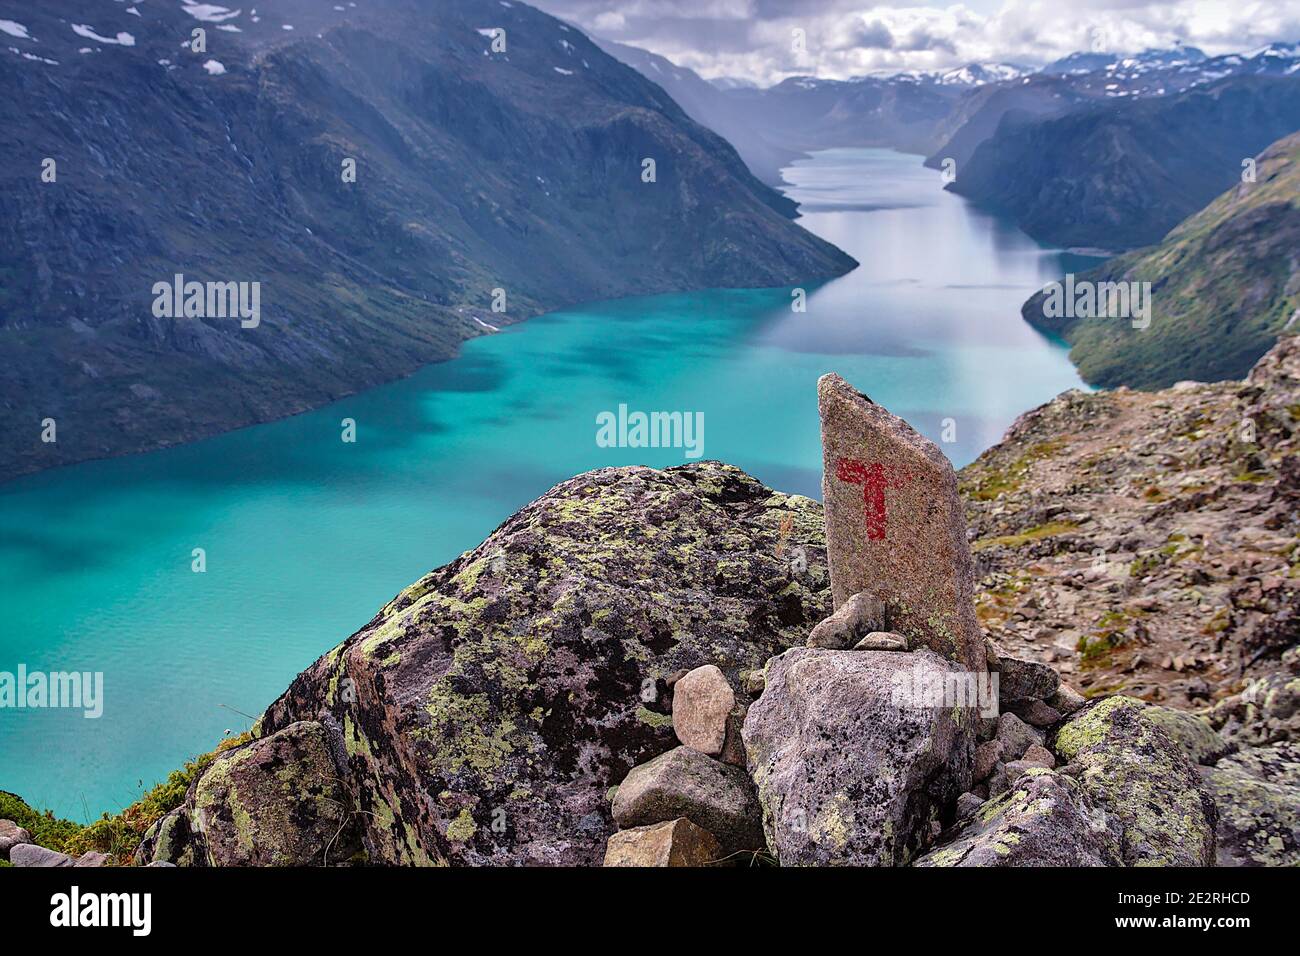 The red T marking the path at Bessegen Ridge with the blue glacial Gjende Lake in the background, Norway Stock Photo